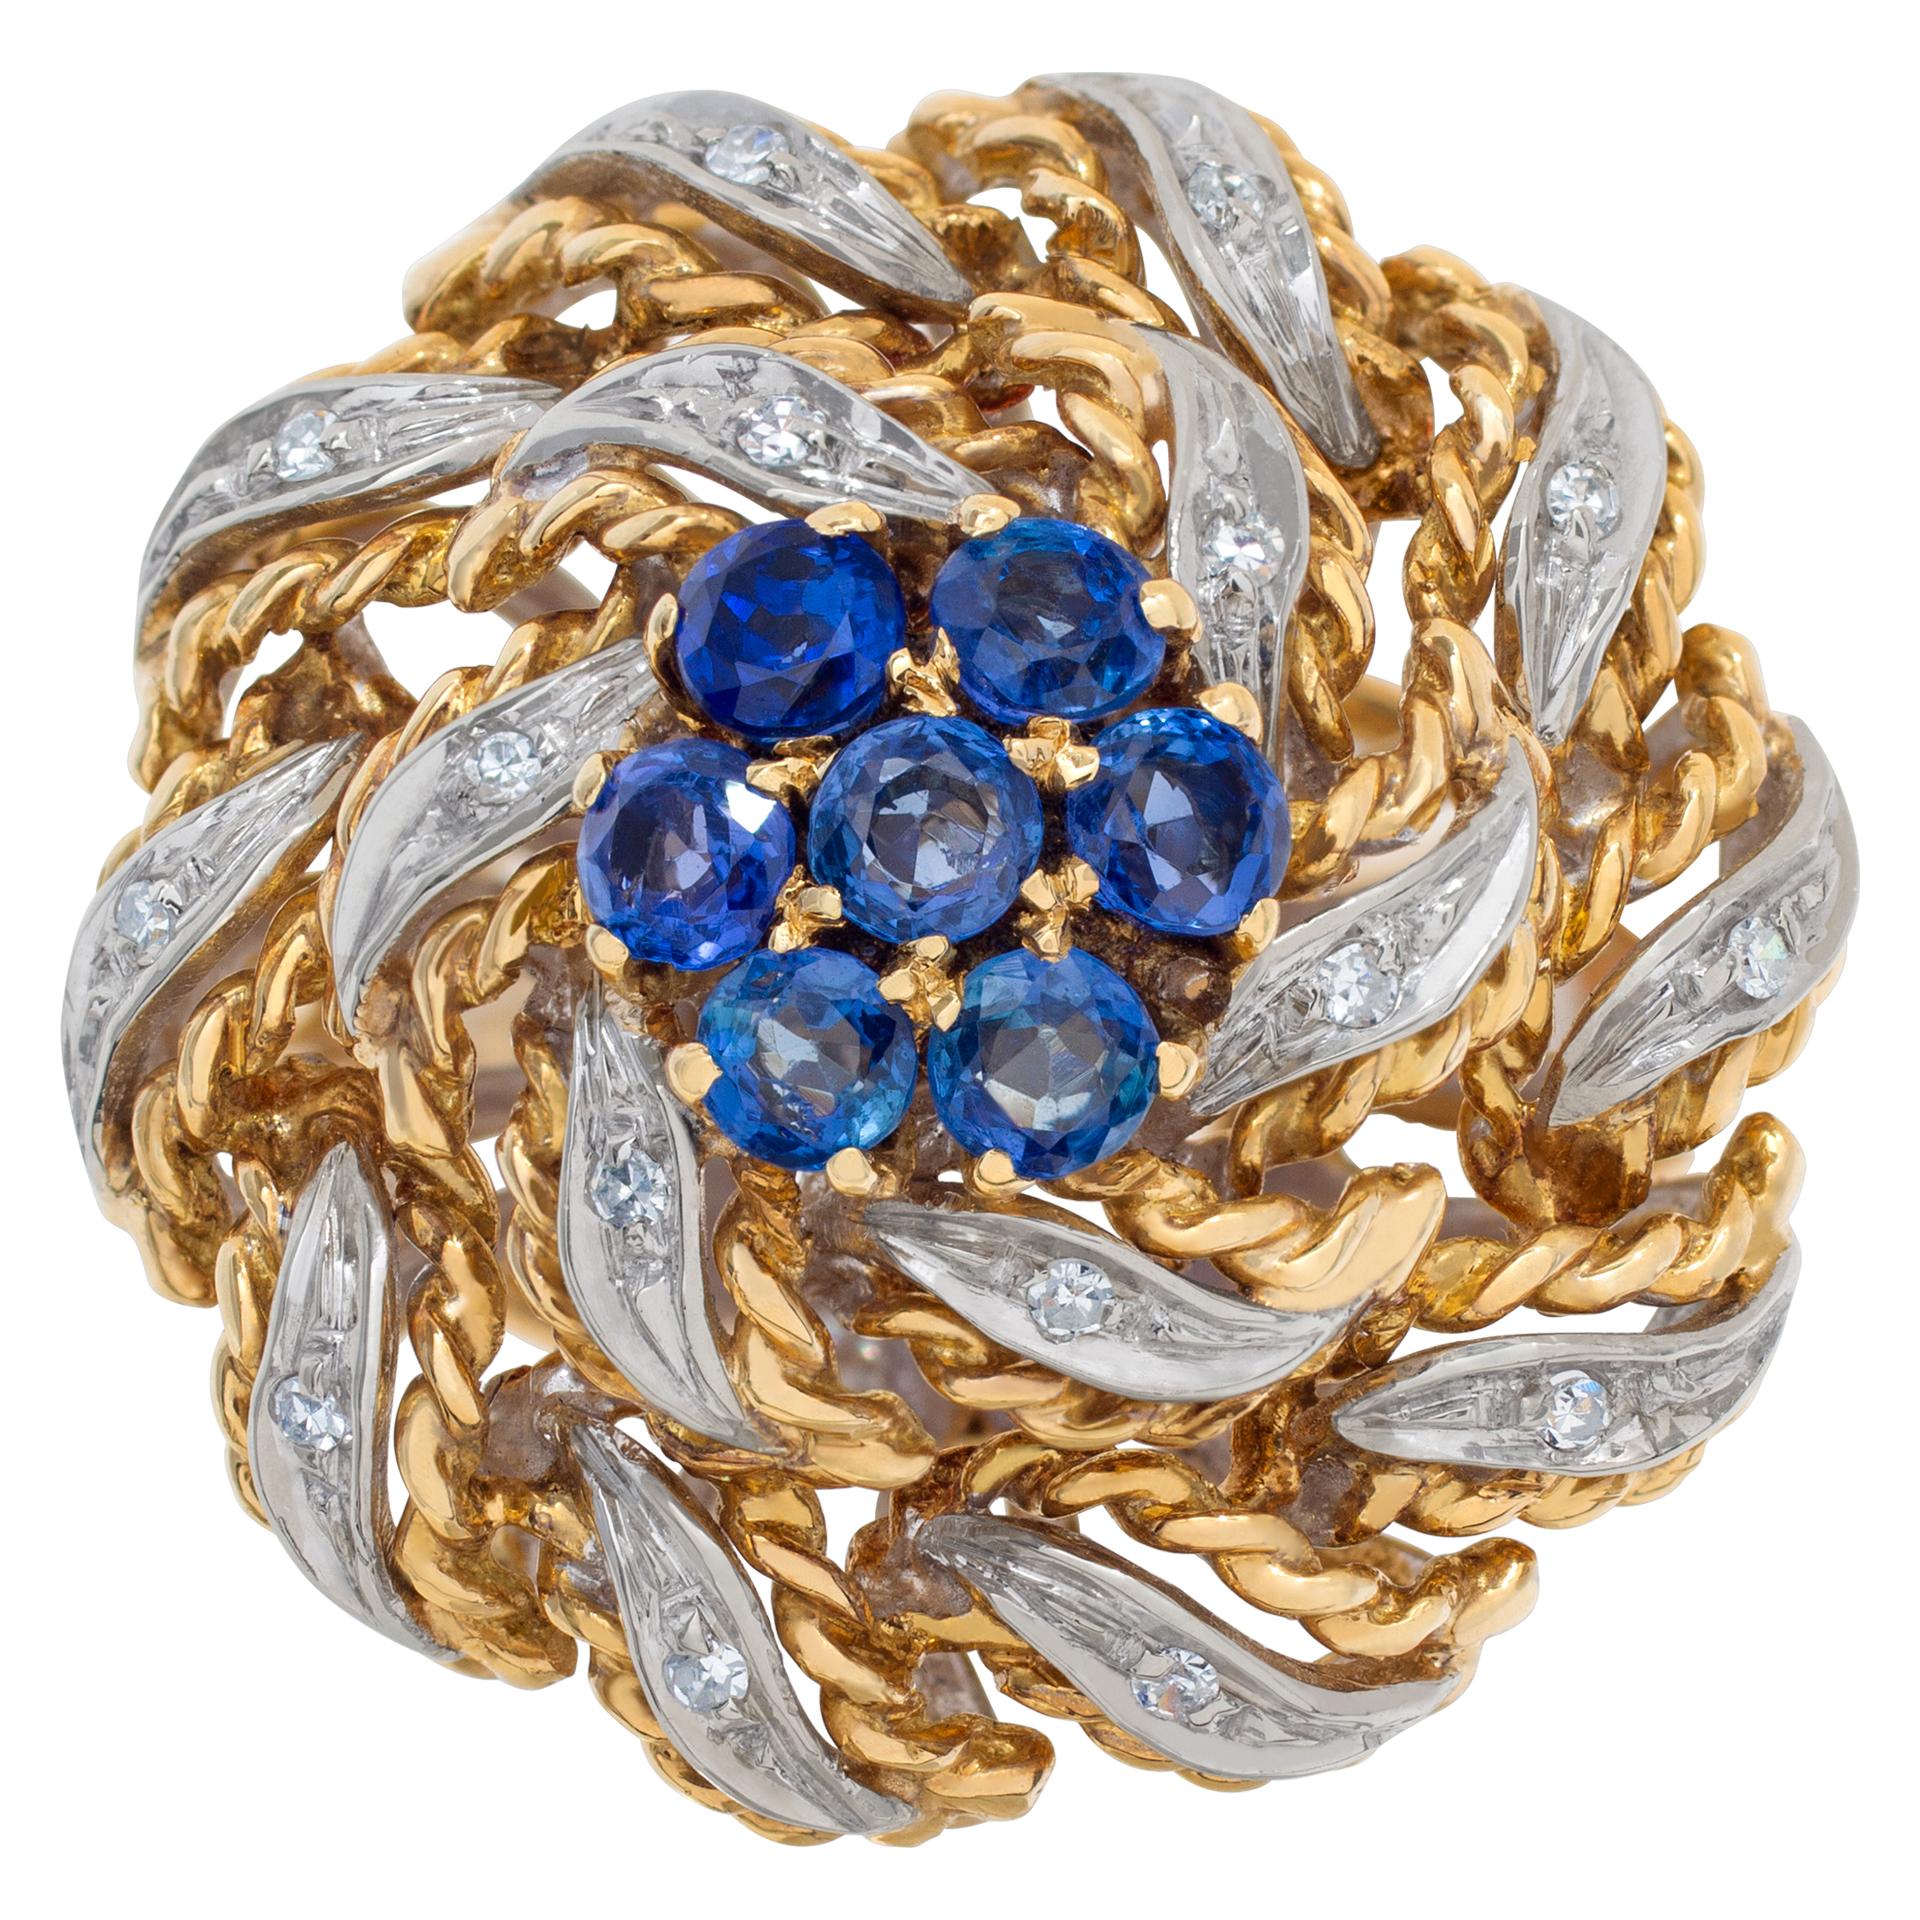 Flower sapphire and diamond ring in twisted 18k white and yellow gold. Size 6.5

This Sapphire ring is currently size 6.5 and some items can be sized up or down, please ask! It weighs 7.8 pennyweights and is 18k.